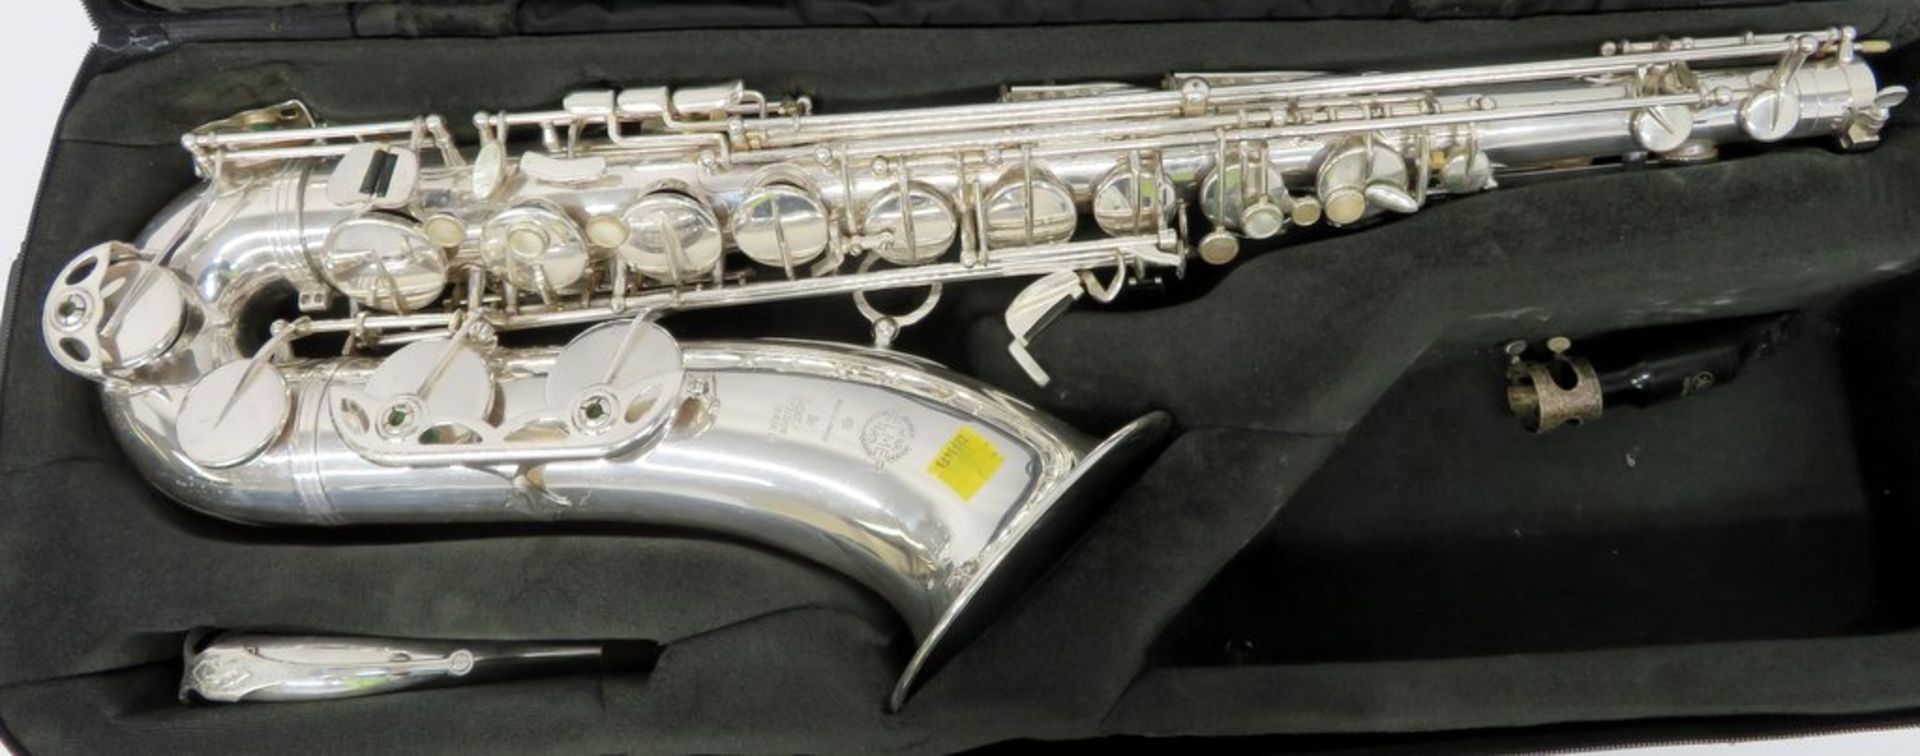 Henri Selmer Super Action 80 Serie 2 Tenor Saxophone Complete With Case. - Image 2 of 20